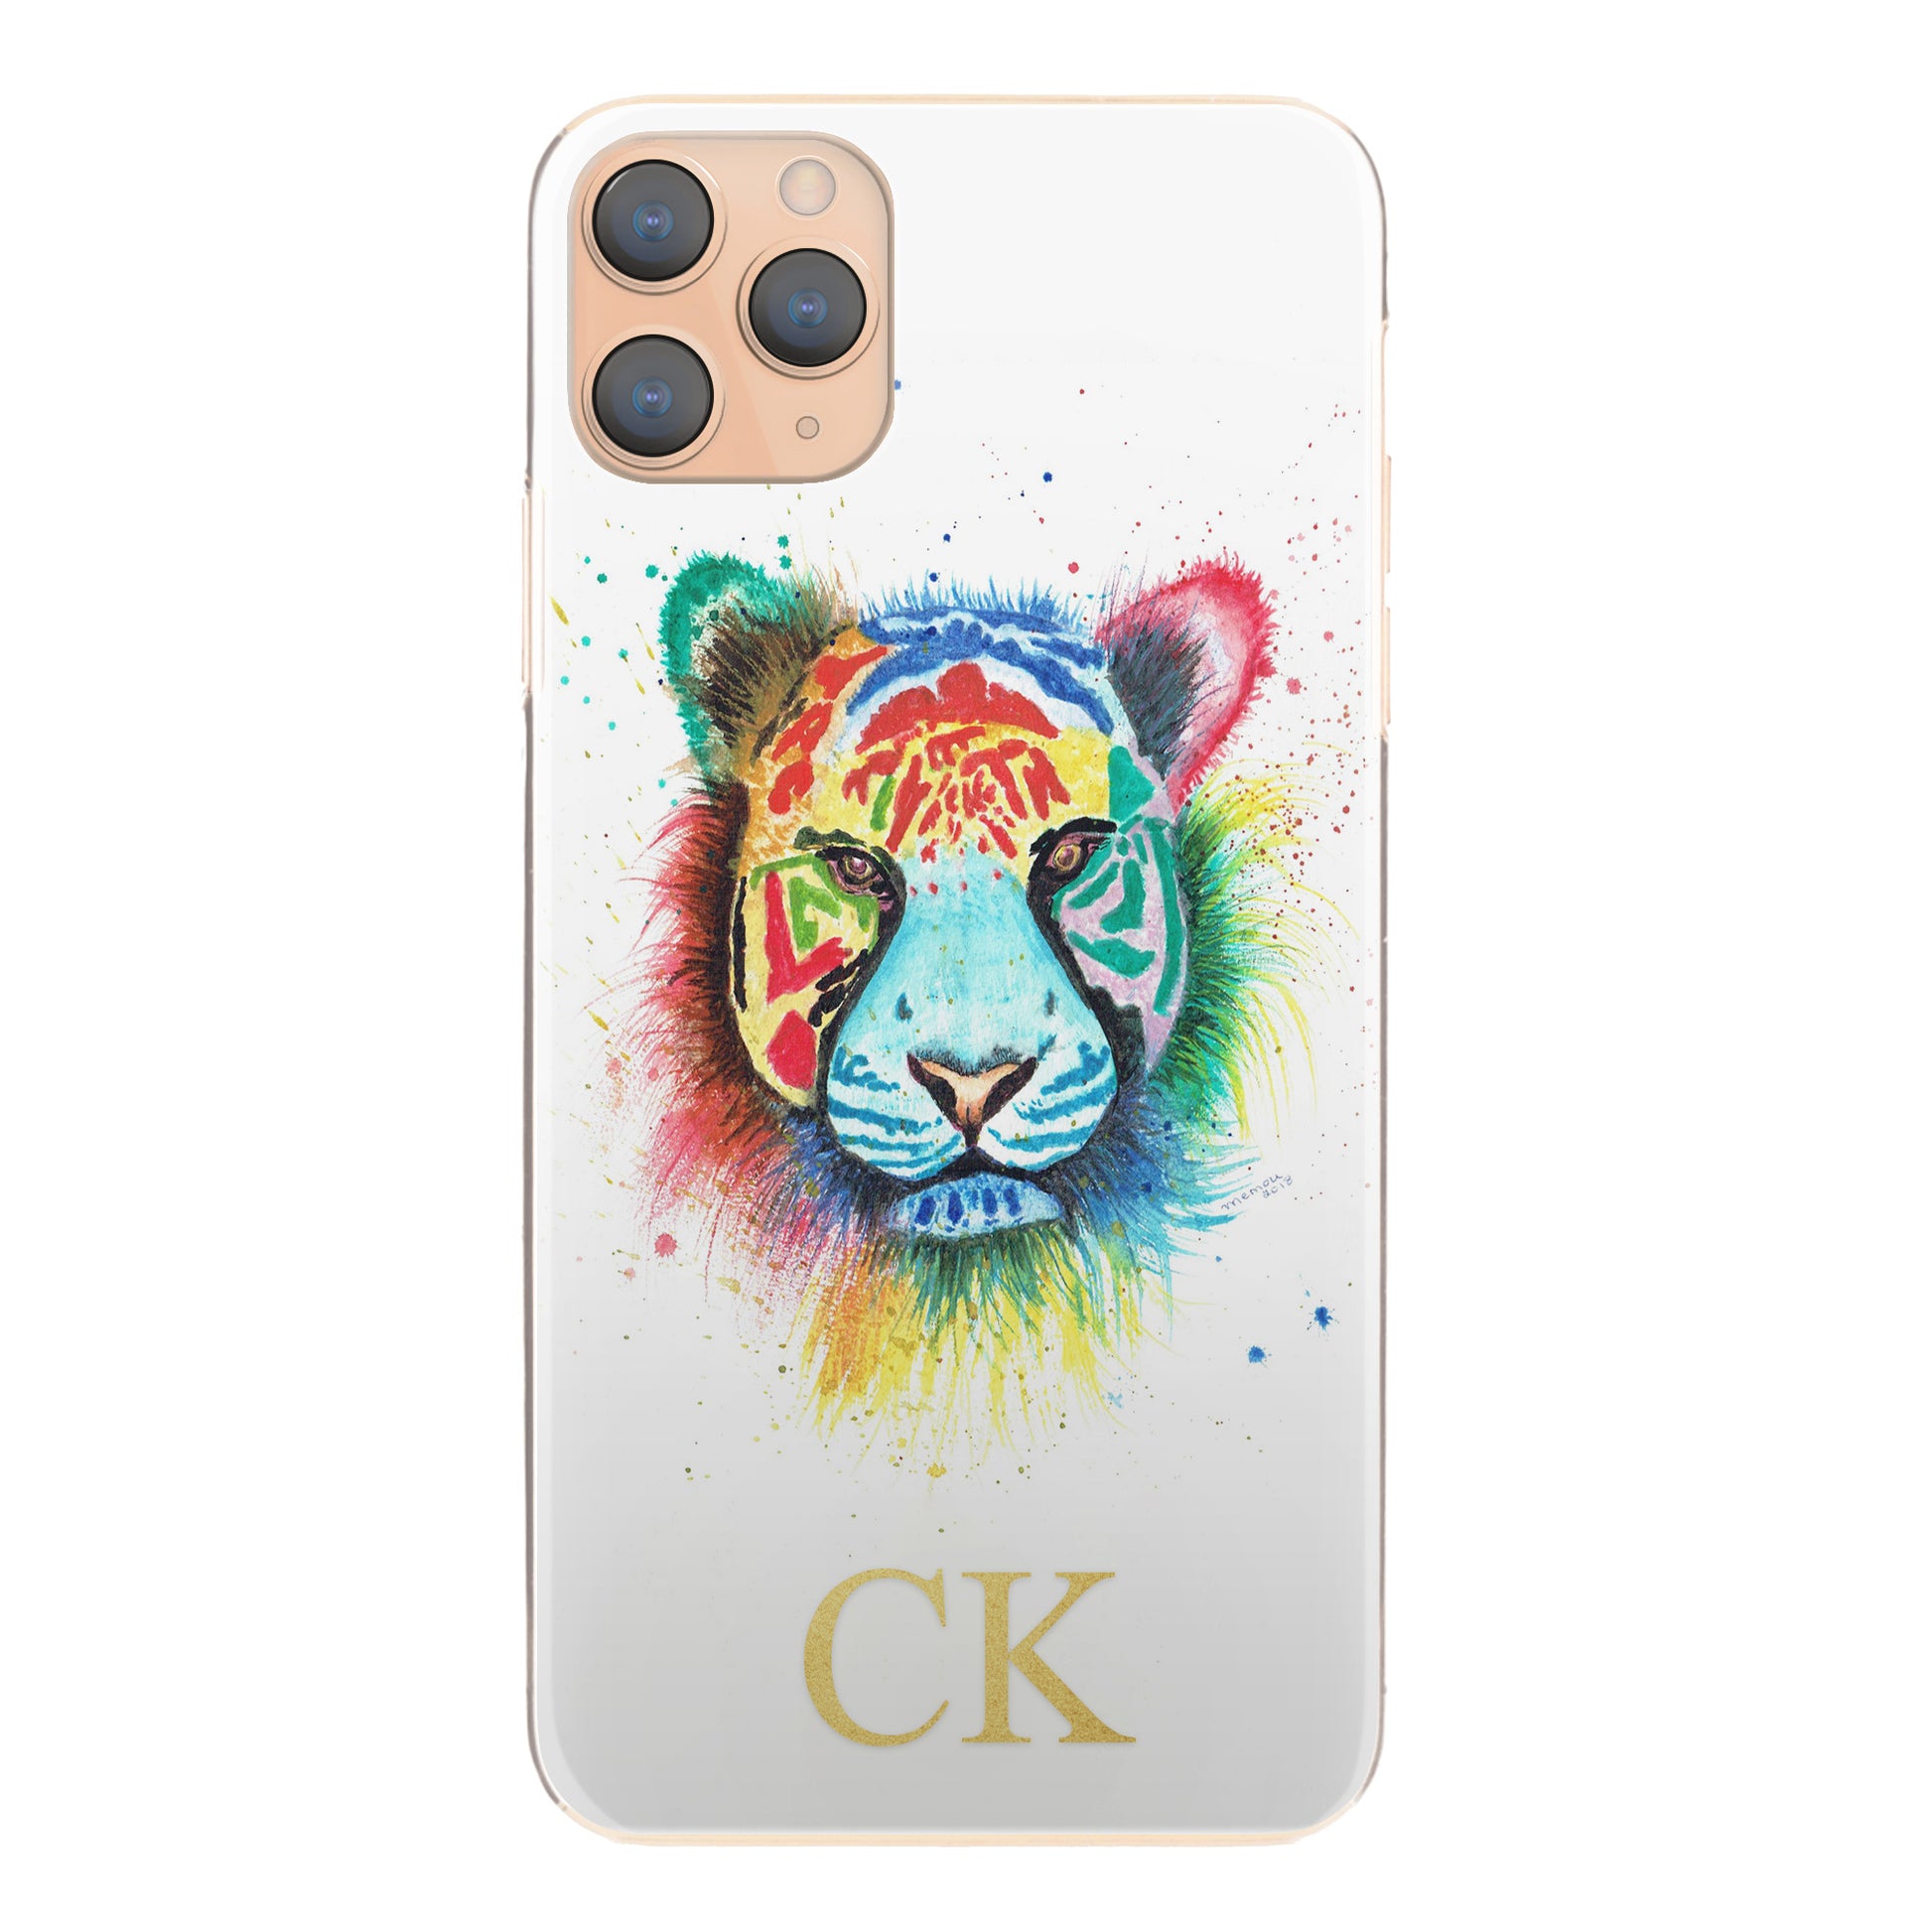 Personalised Samsung Galaxy Phone Hard Case with Rainbow Tiger and Gold Initials